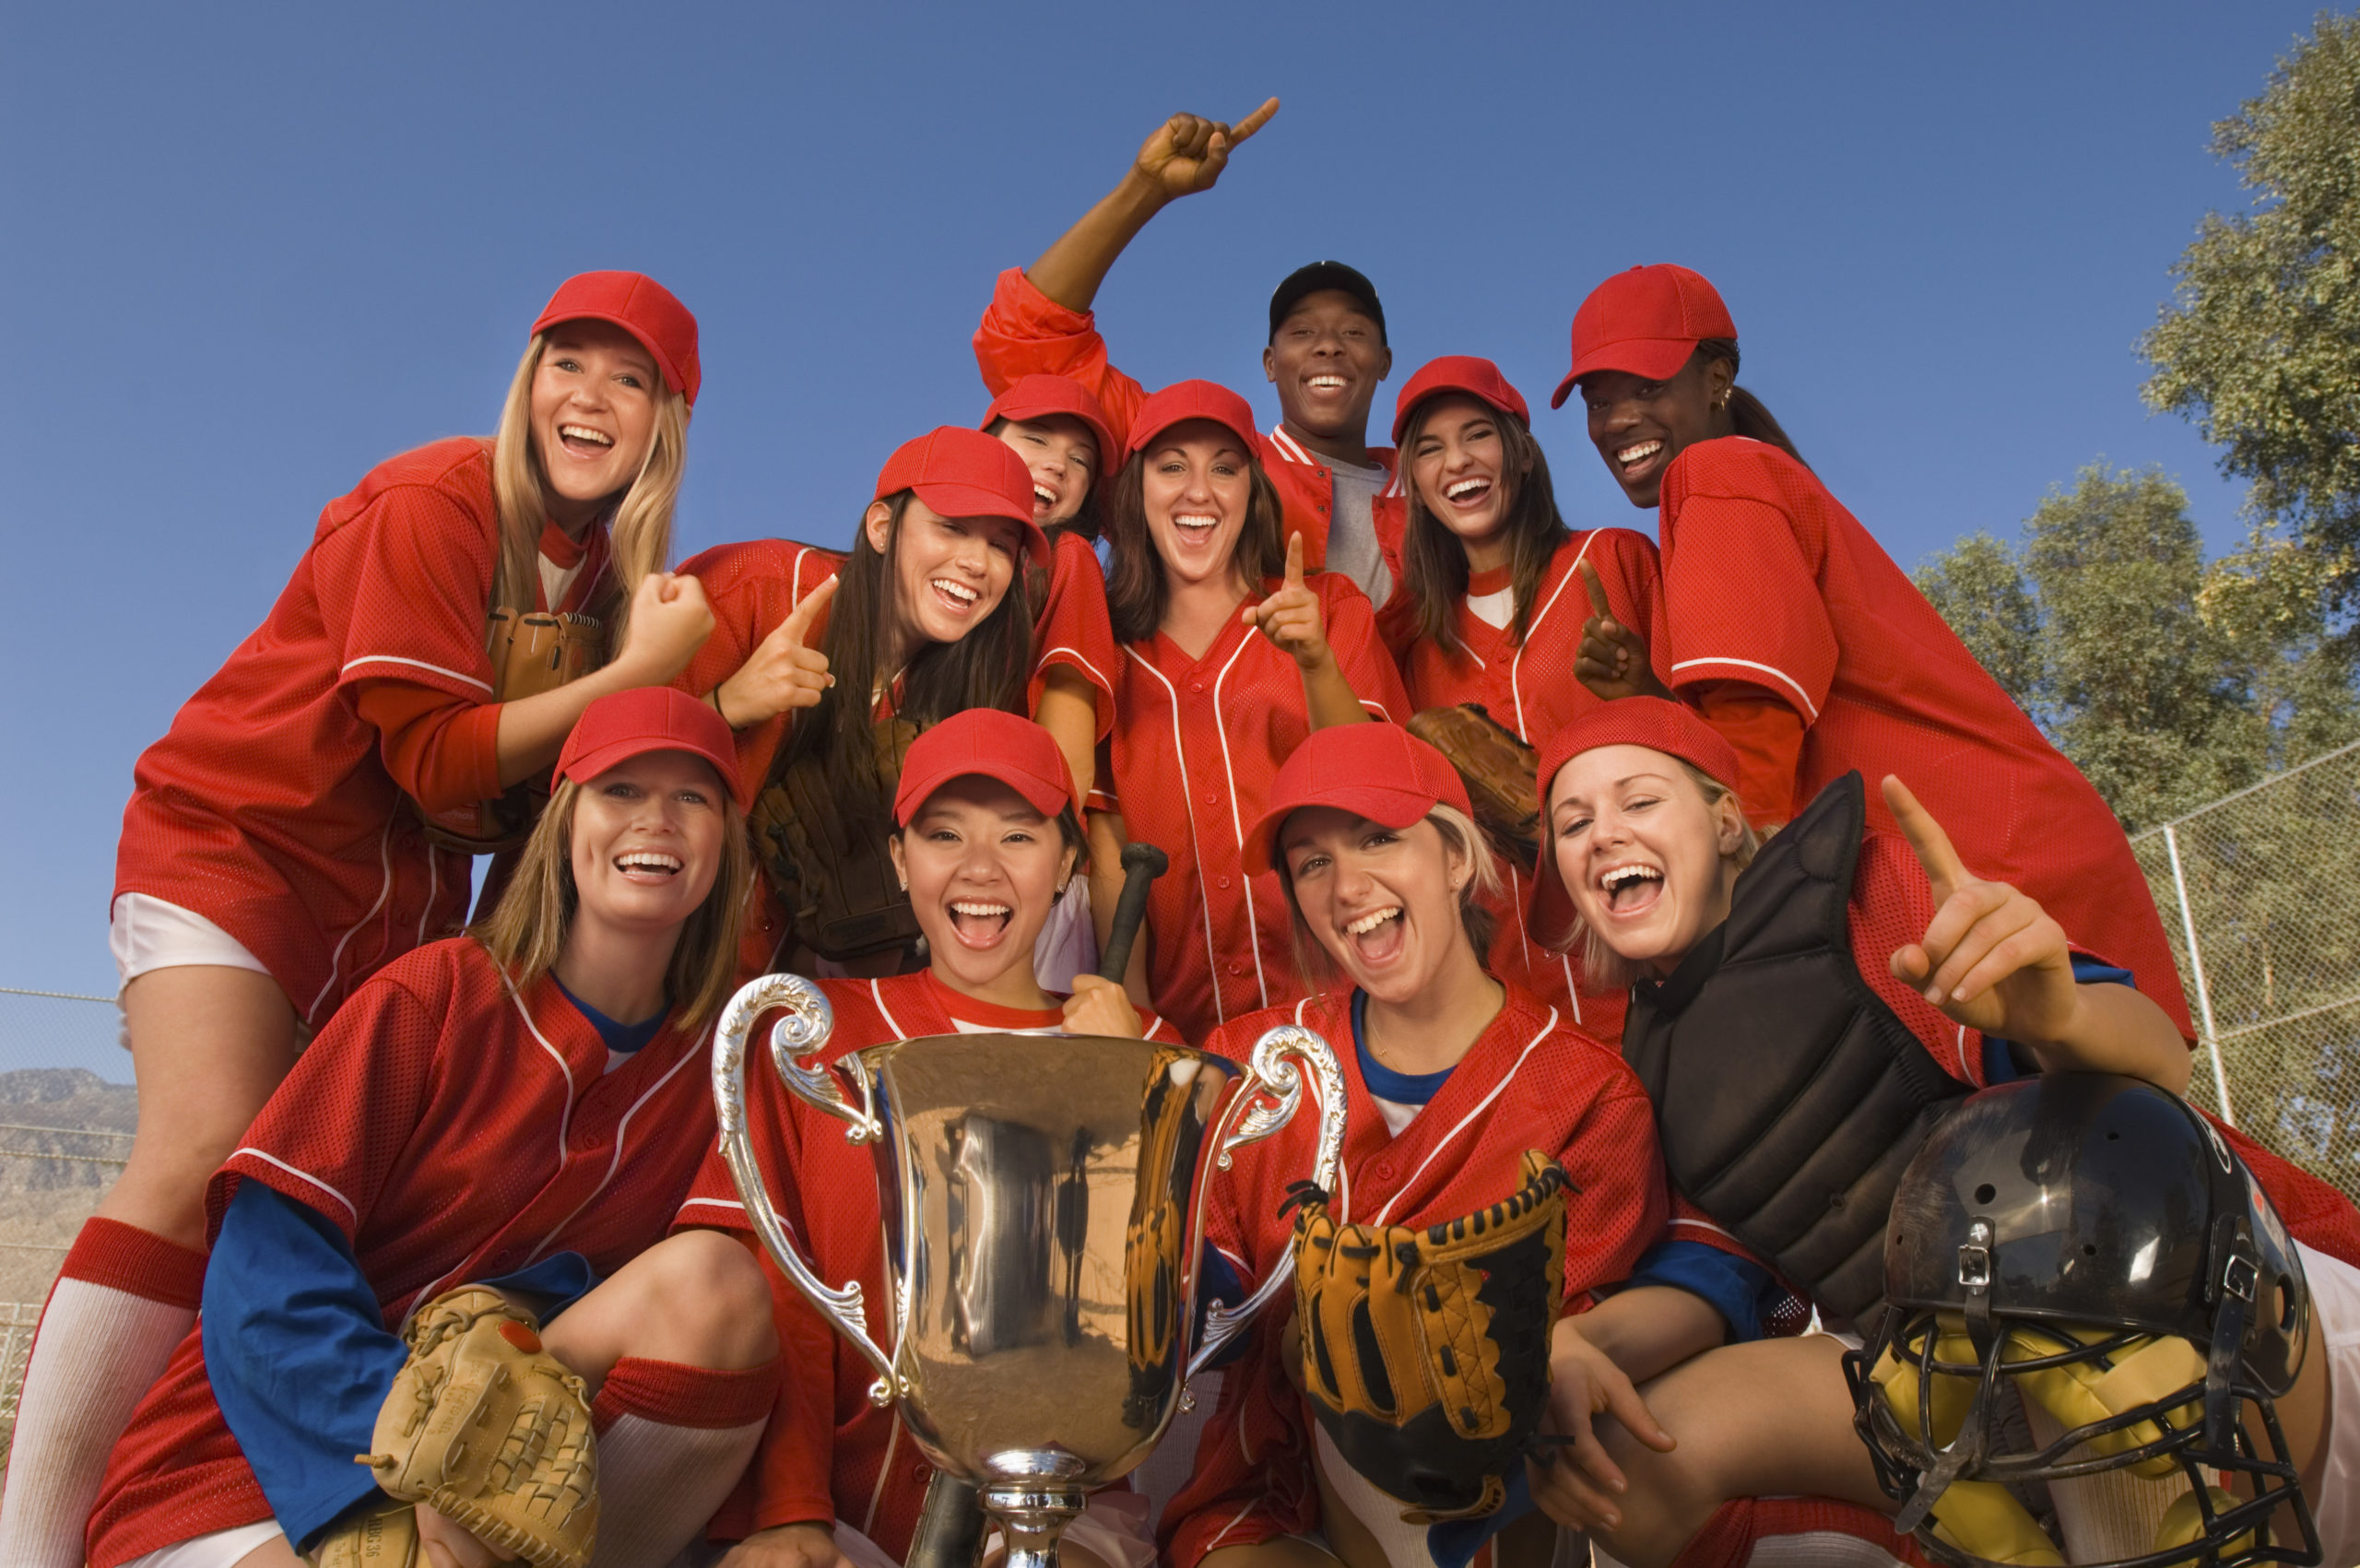 Adult rec league women’s softball team dressed in red celebrates winning a trophy.